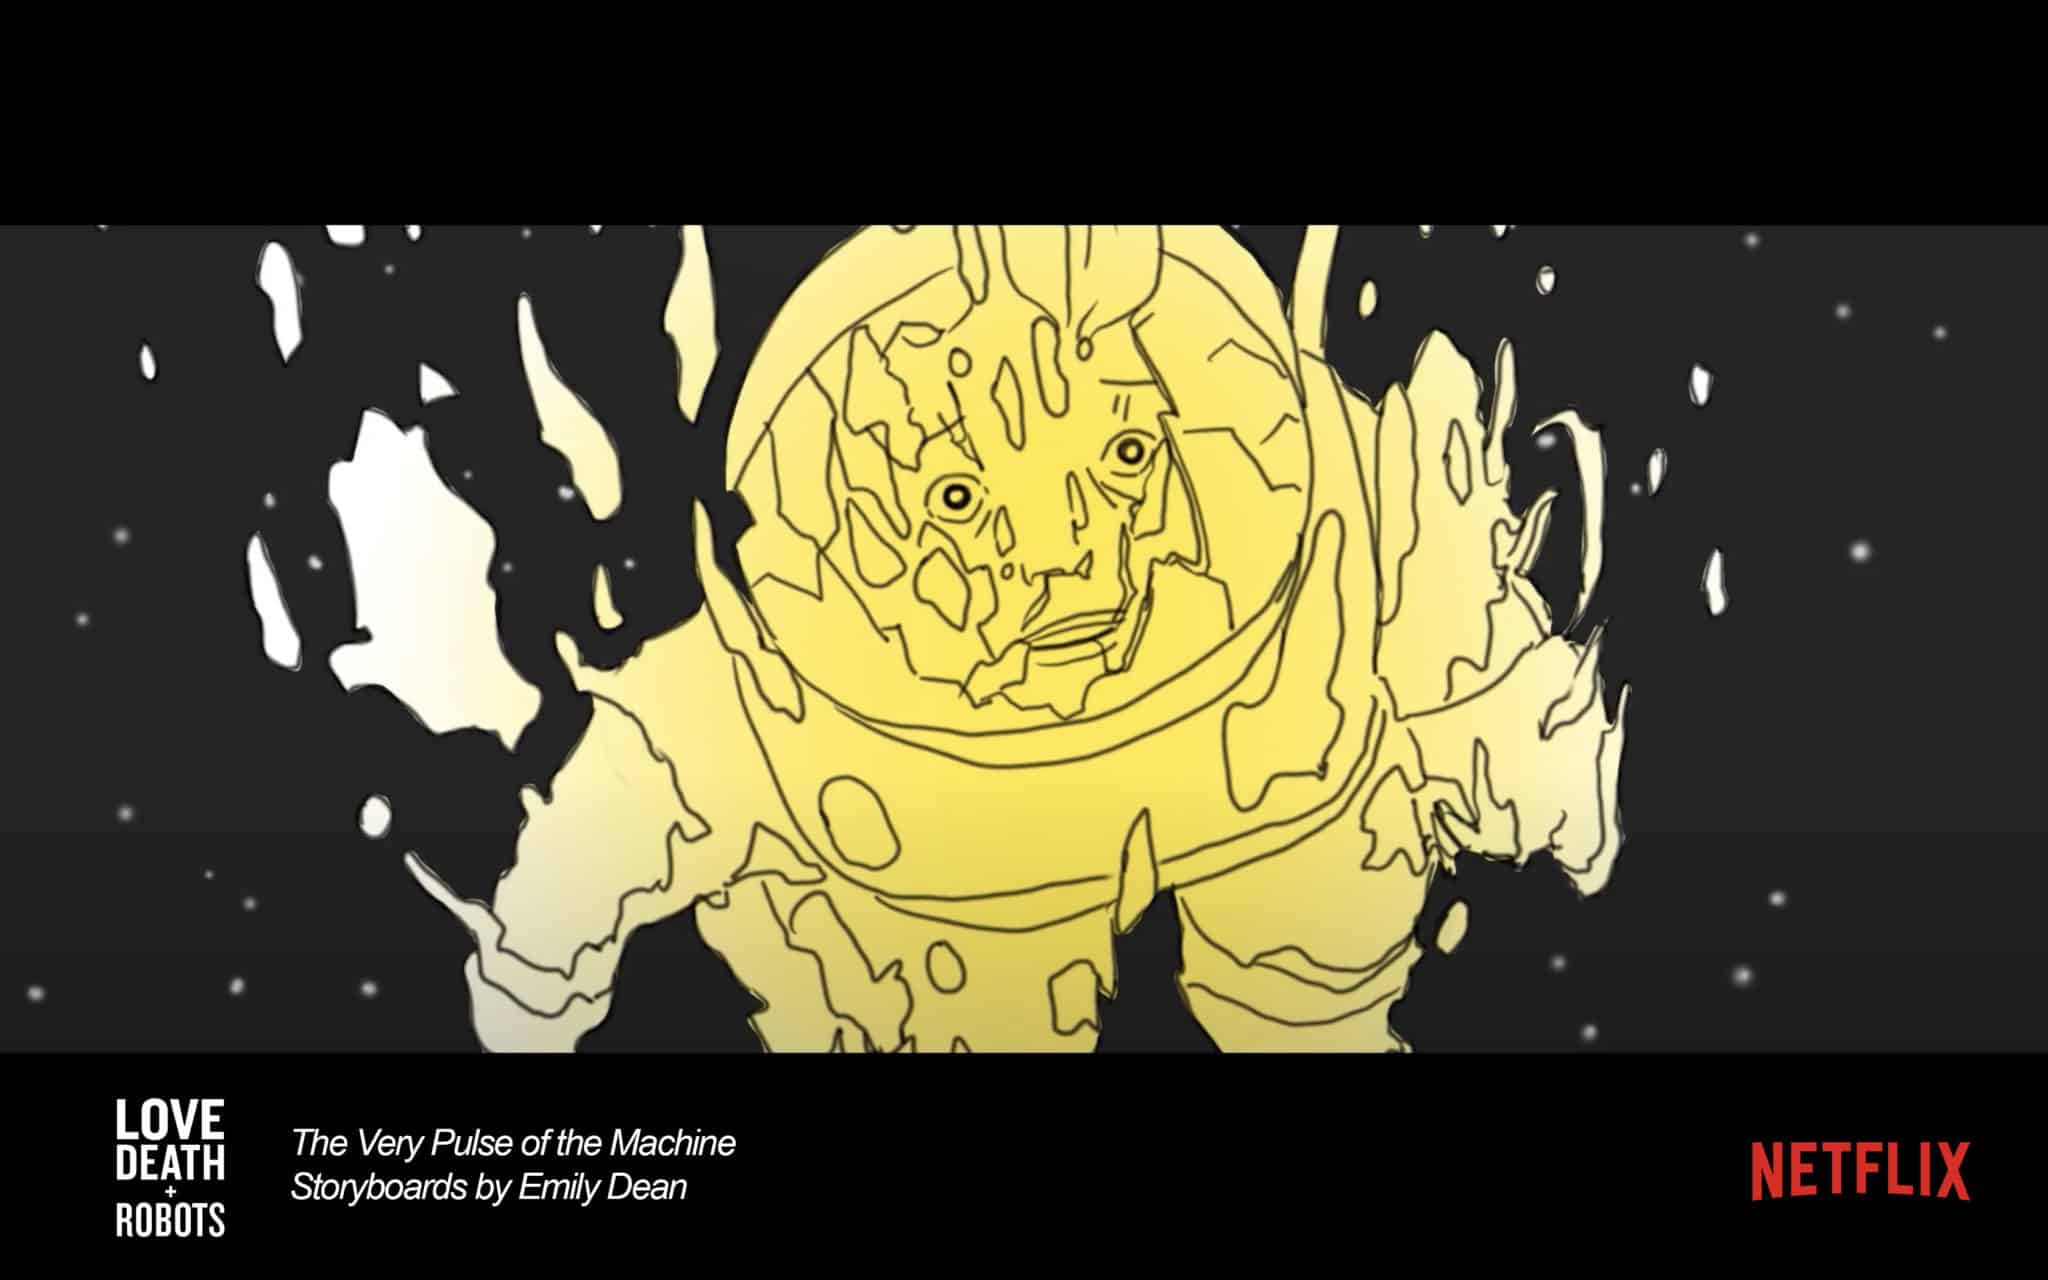 Storyboard sketch. Astronaut, colored yellow, begins disintegrating into the black starry background.